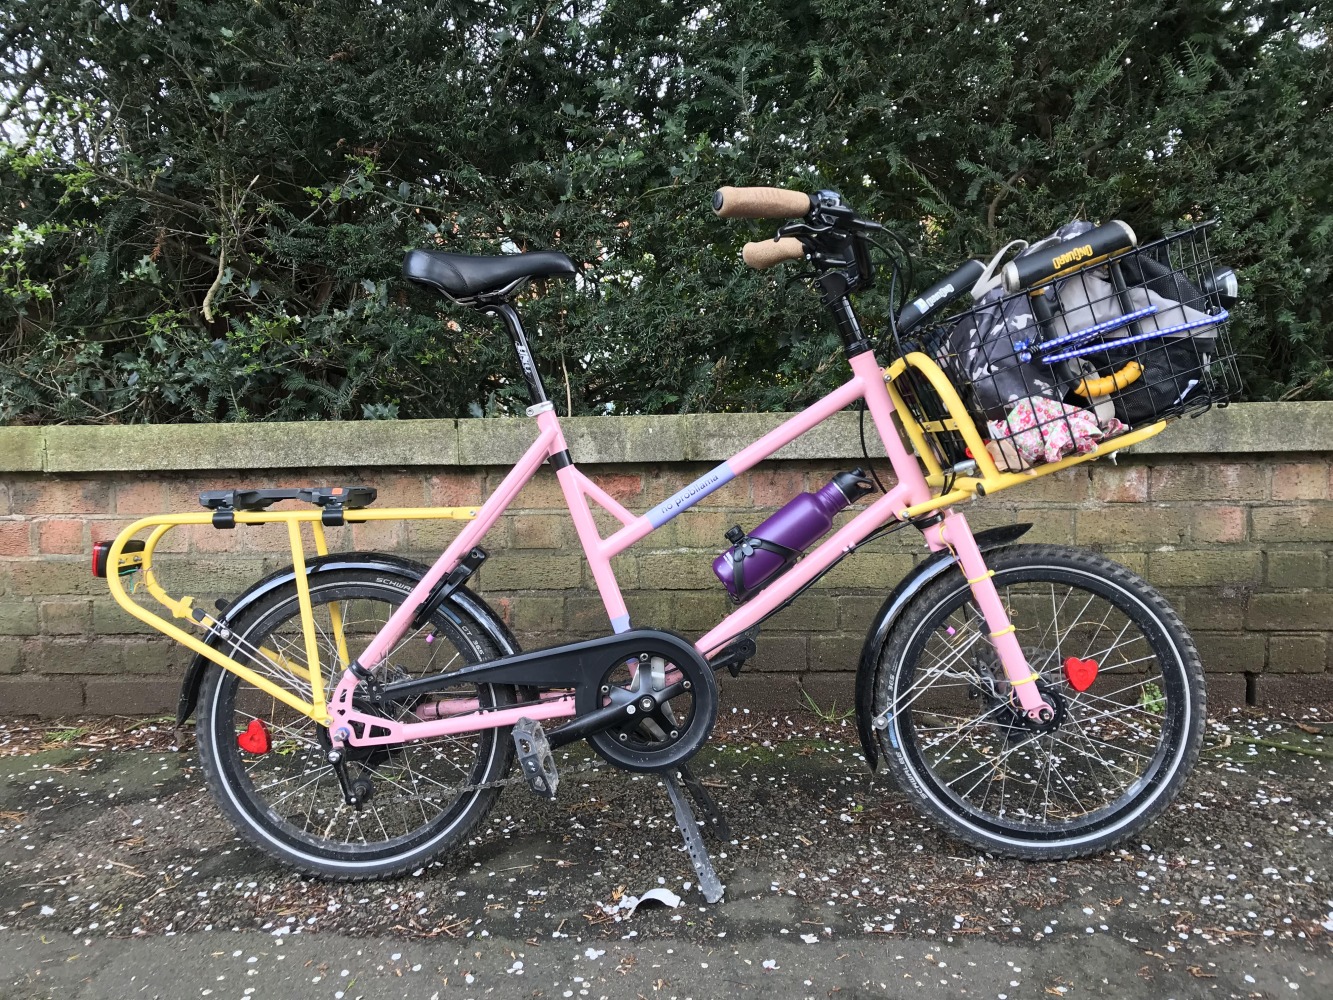 Cycling in Ramadan - A pink cargo bike with yellow front and rear racks, and a basket loaded up with luggage, parked in front of a wall. There's a bottle in the bottle cage.